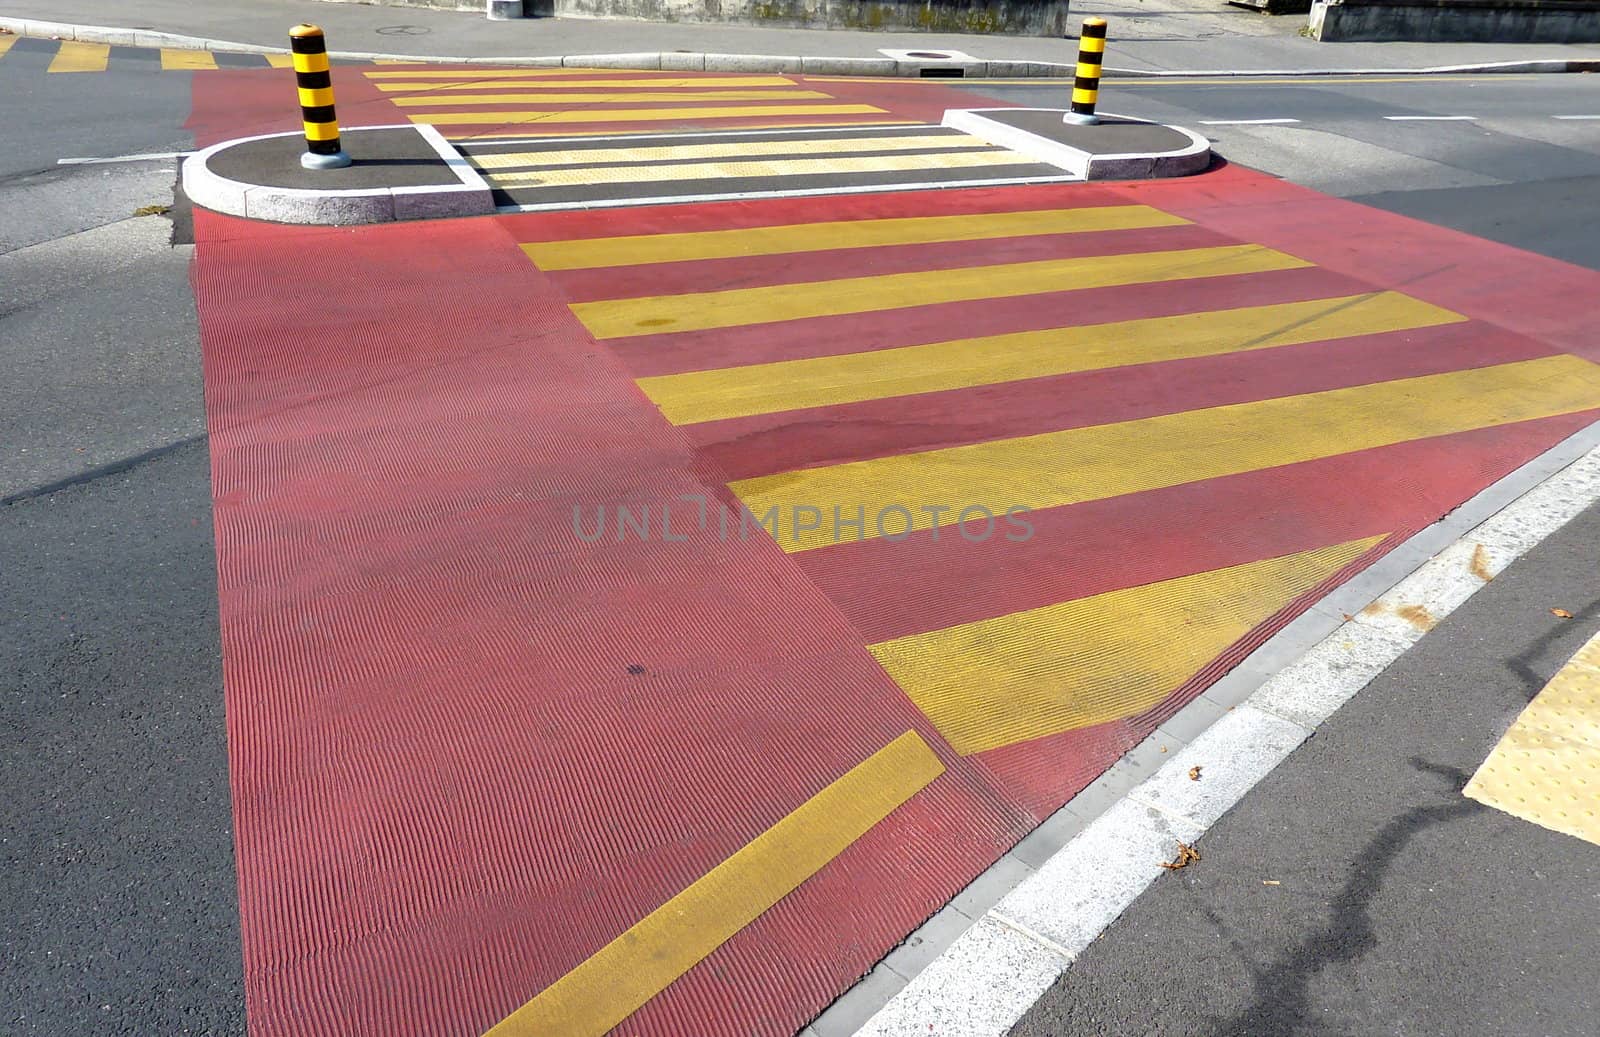 Red and yellow pedestrian crossing in a street